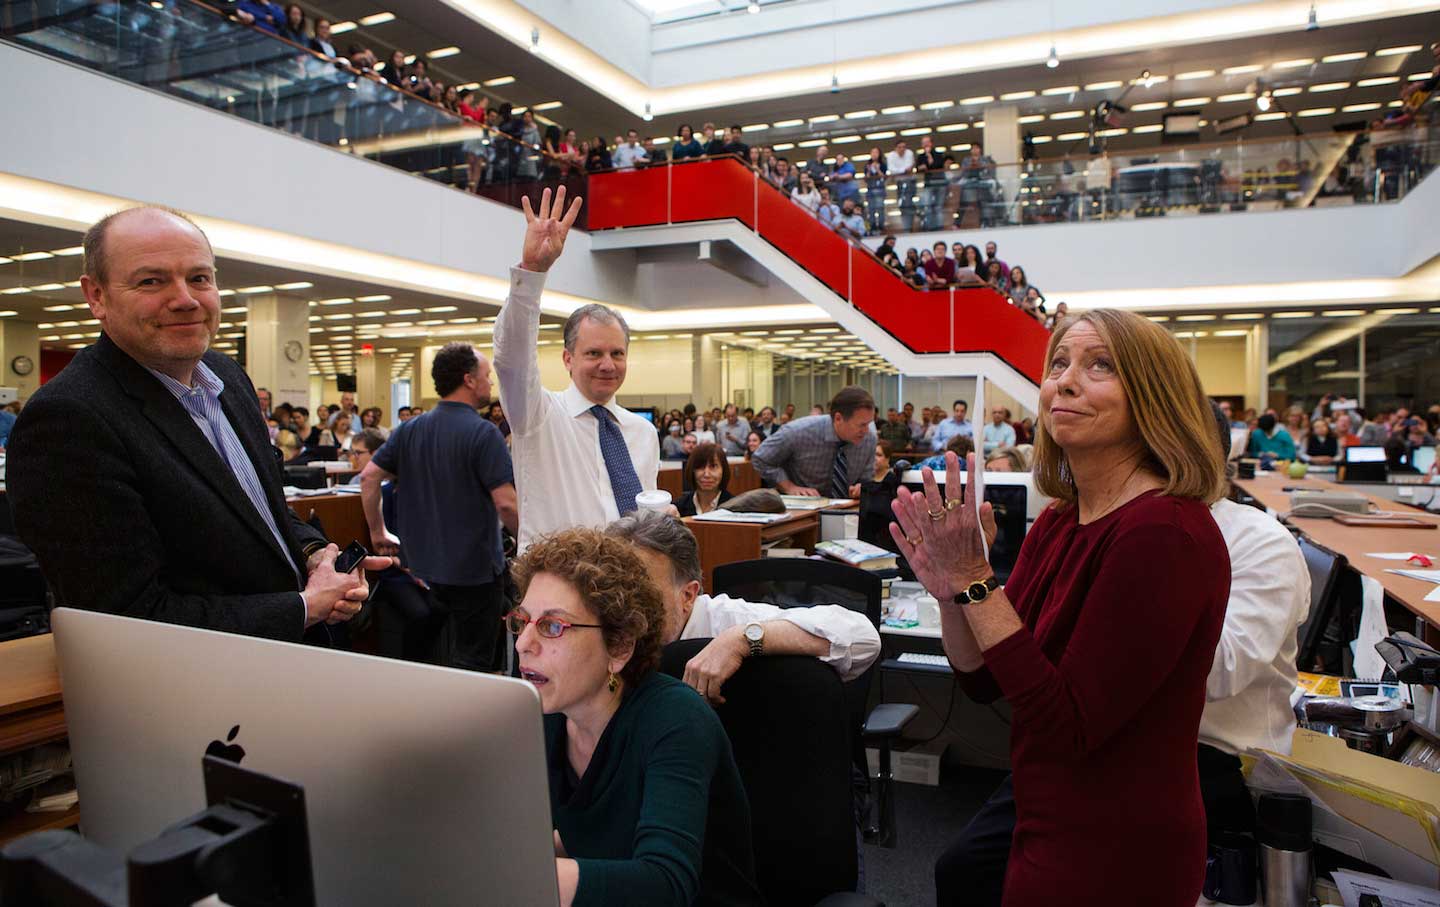 Jill Abramson’s ‘Merchants of Truth’ Can’t Pass Its Own Journalistic Purity Test